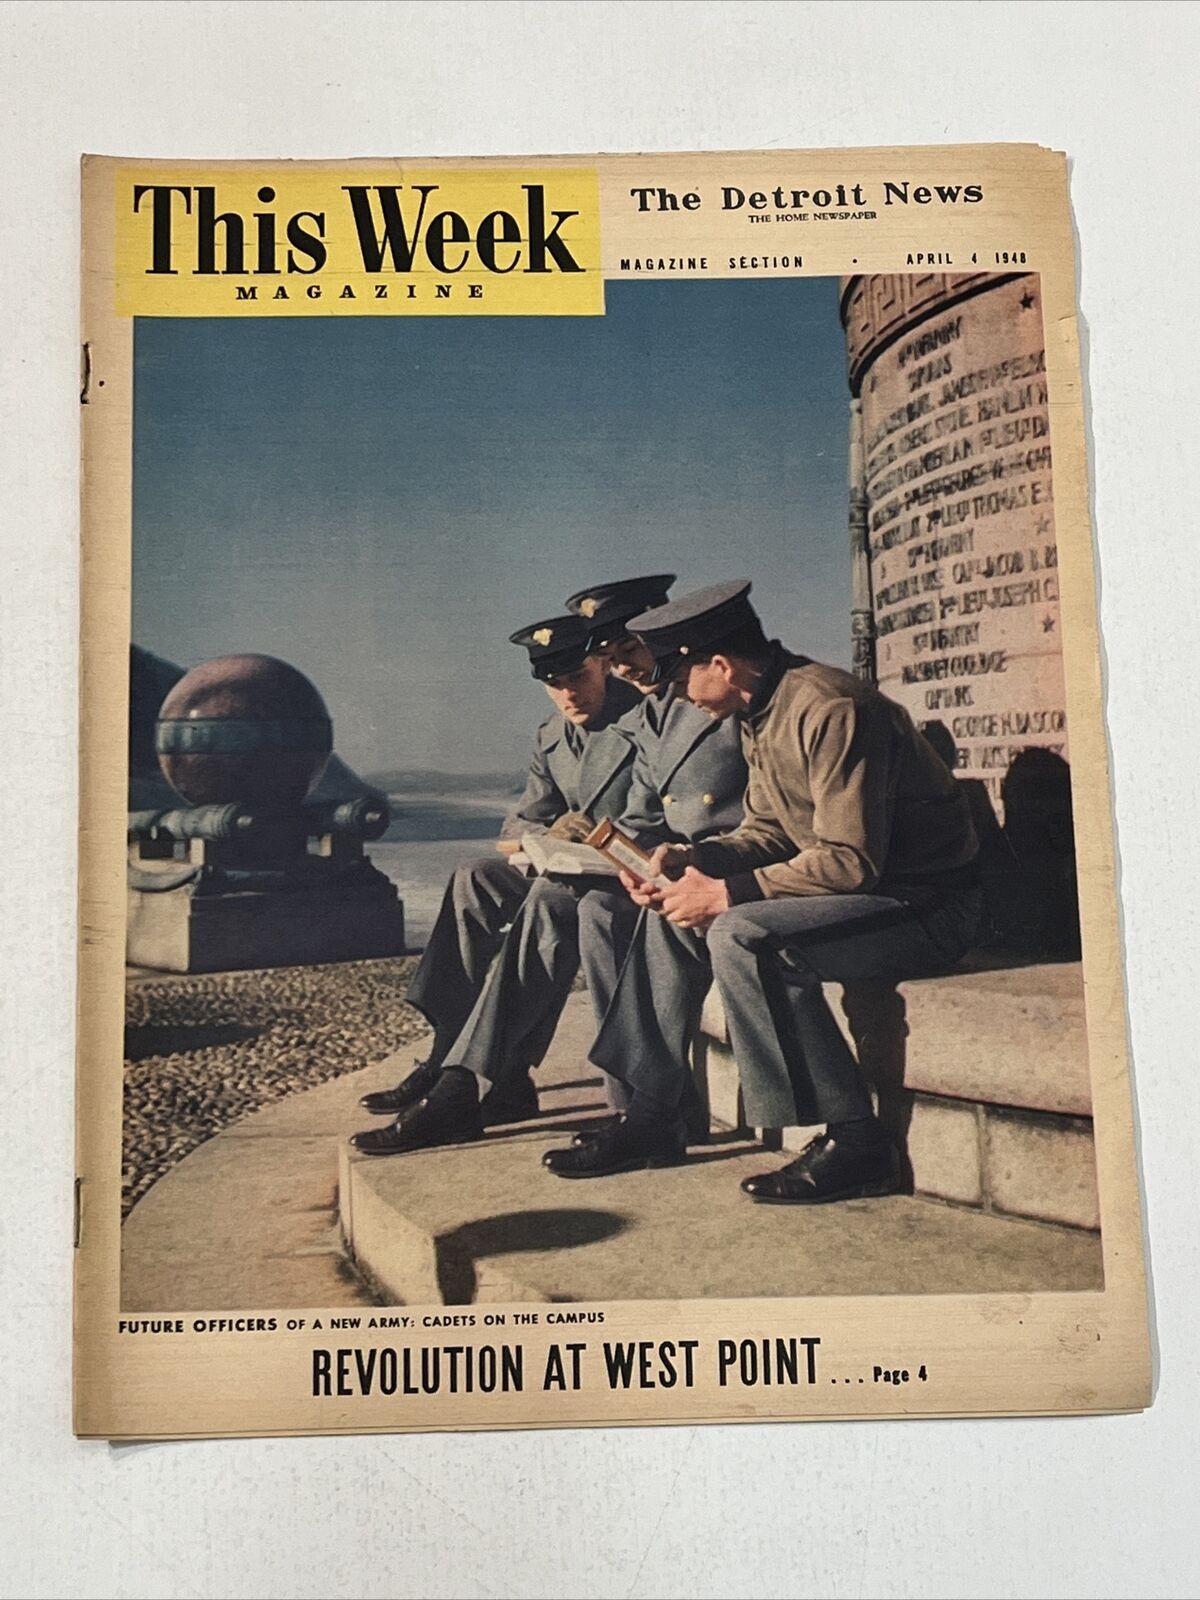 This Week Magazine The Detroit News April 4, 1948 Revolution at West Point